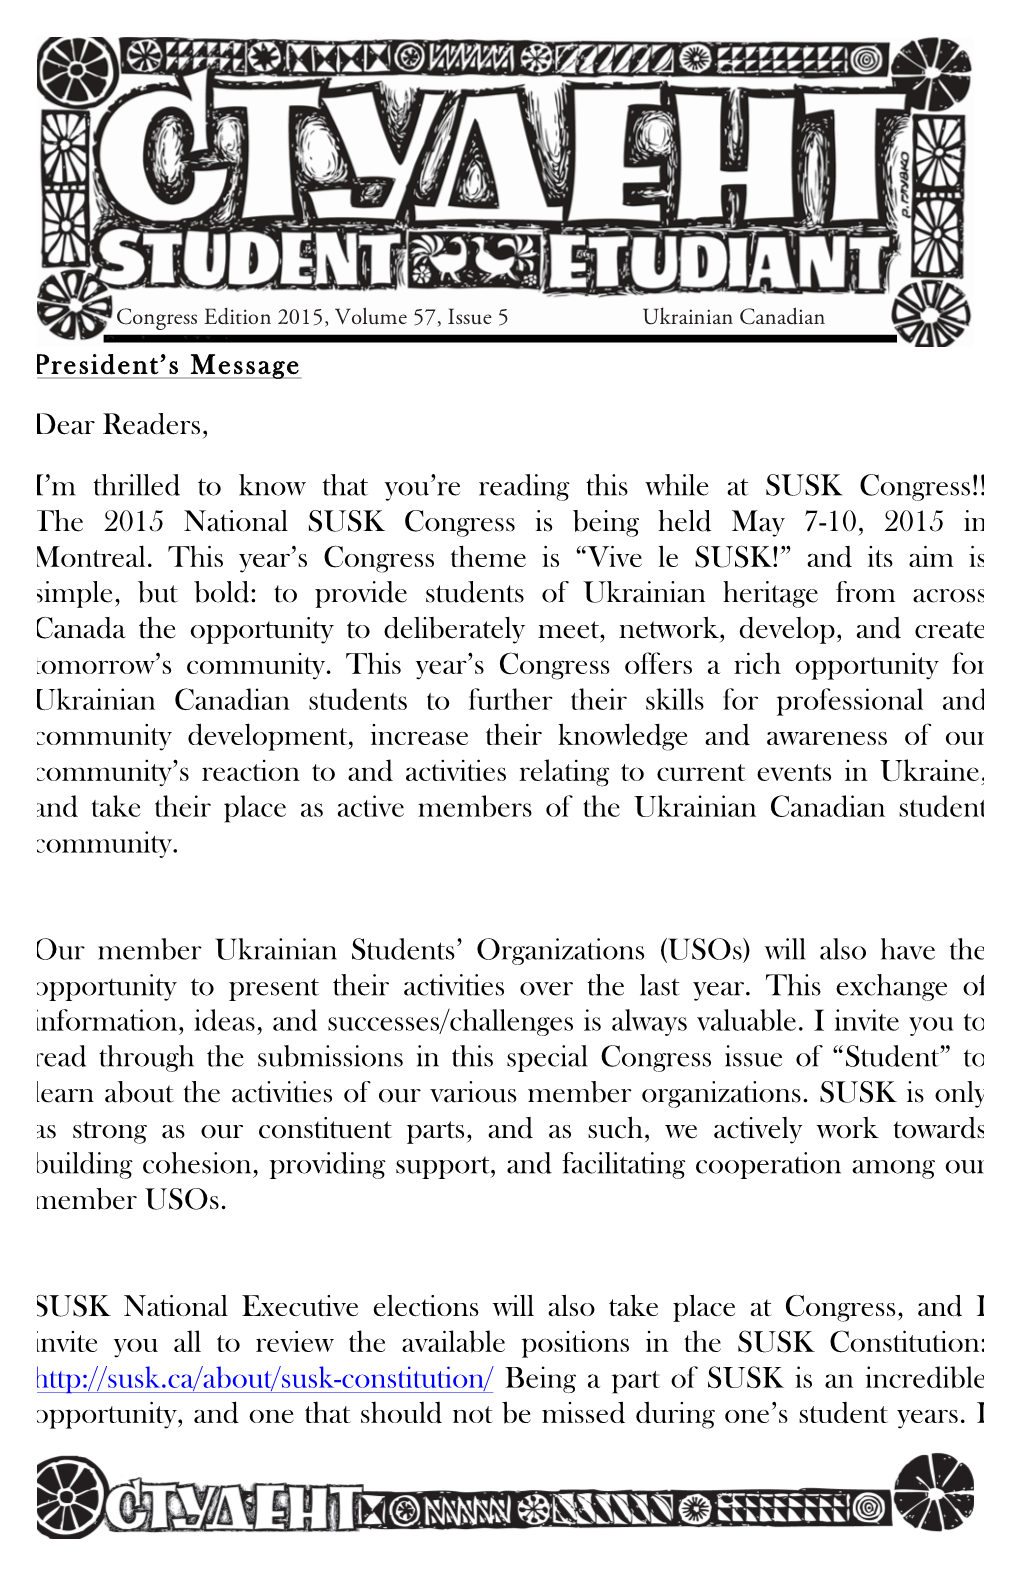 Congress!! the 2015 National SUSK Congress Is Being Held May 7-10, 2015 in Montreal